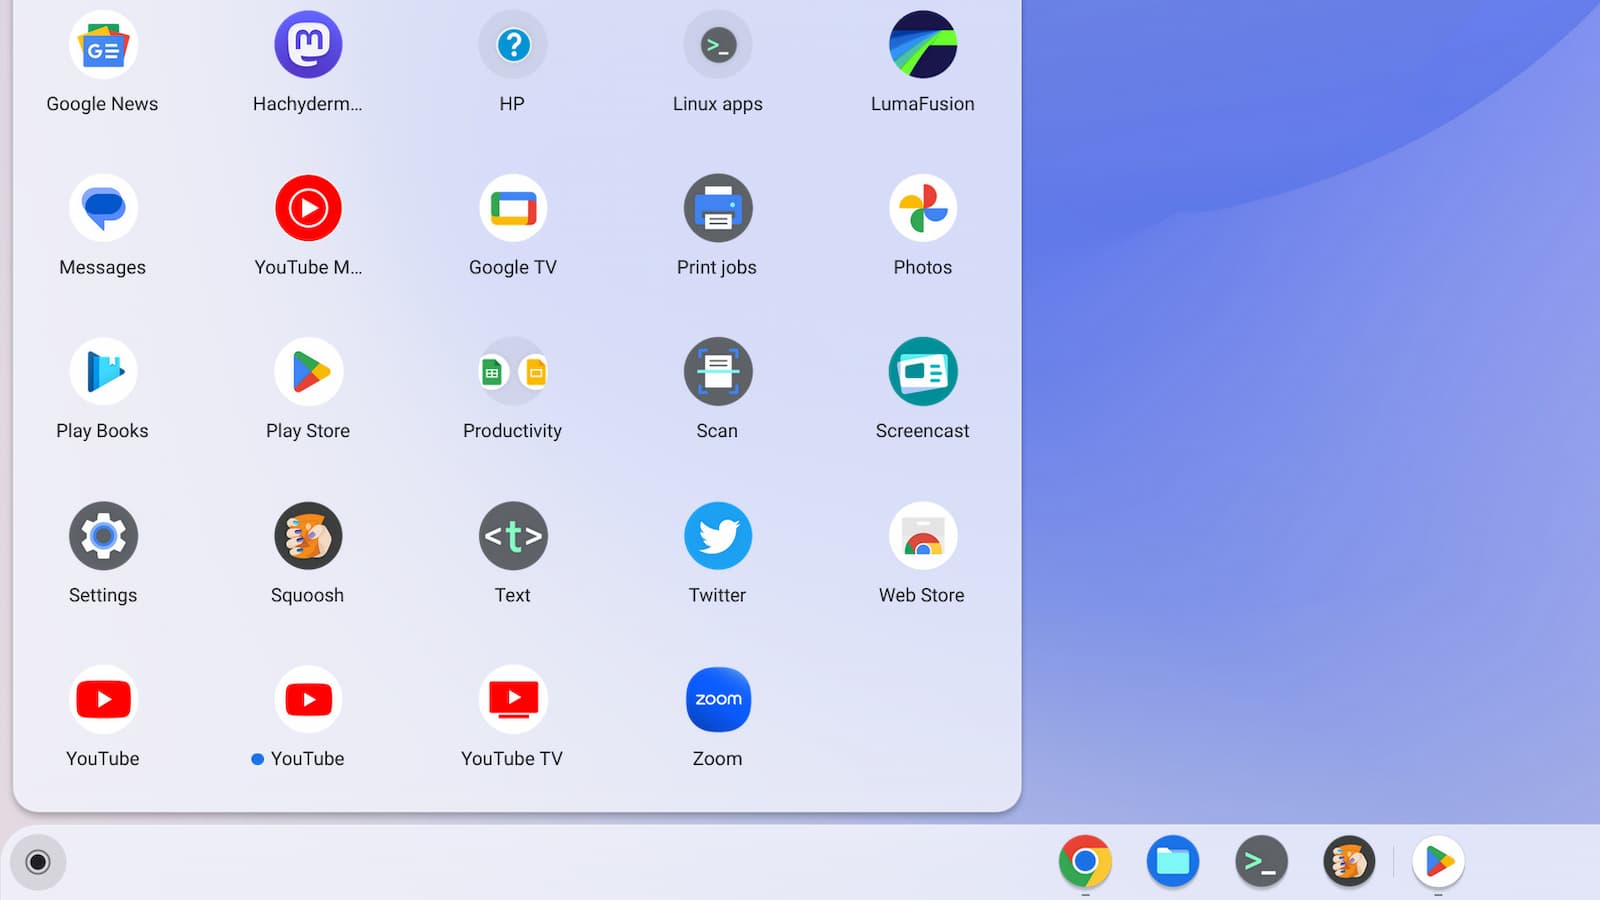 Two ChromeOS apps for YouTube, one is a web app and one is Android app.